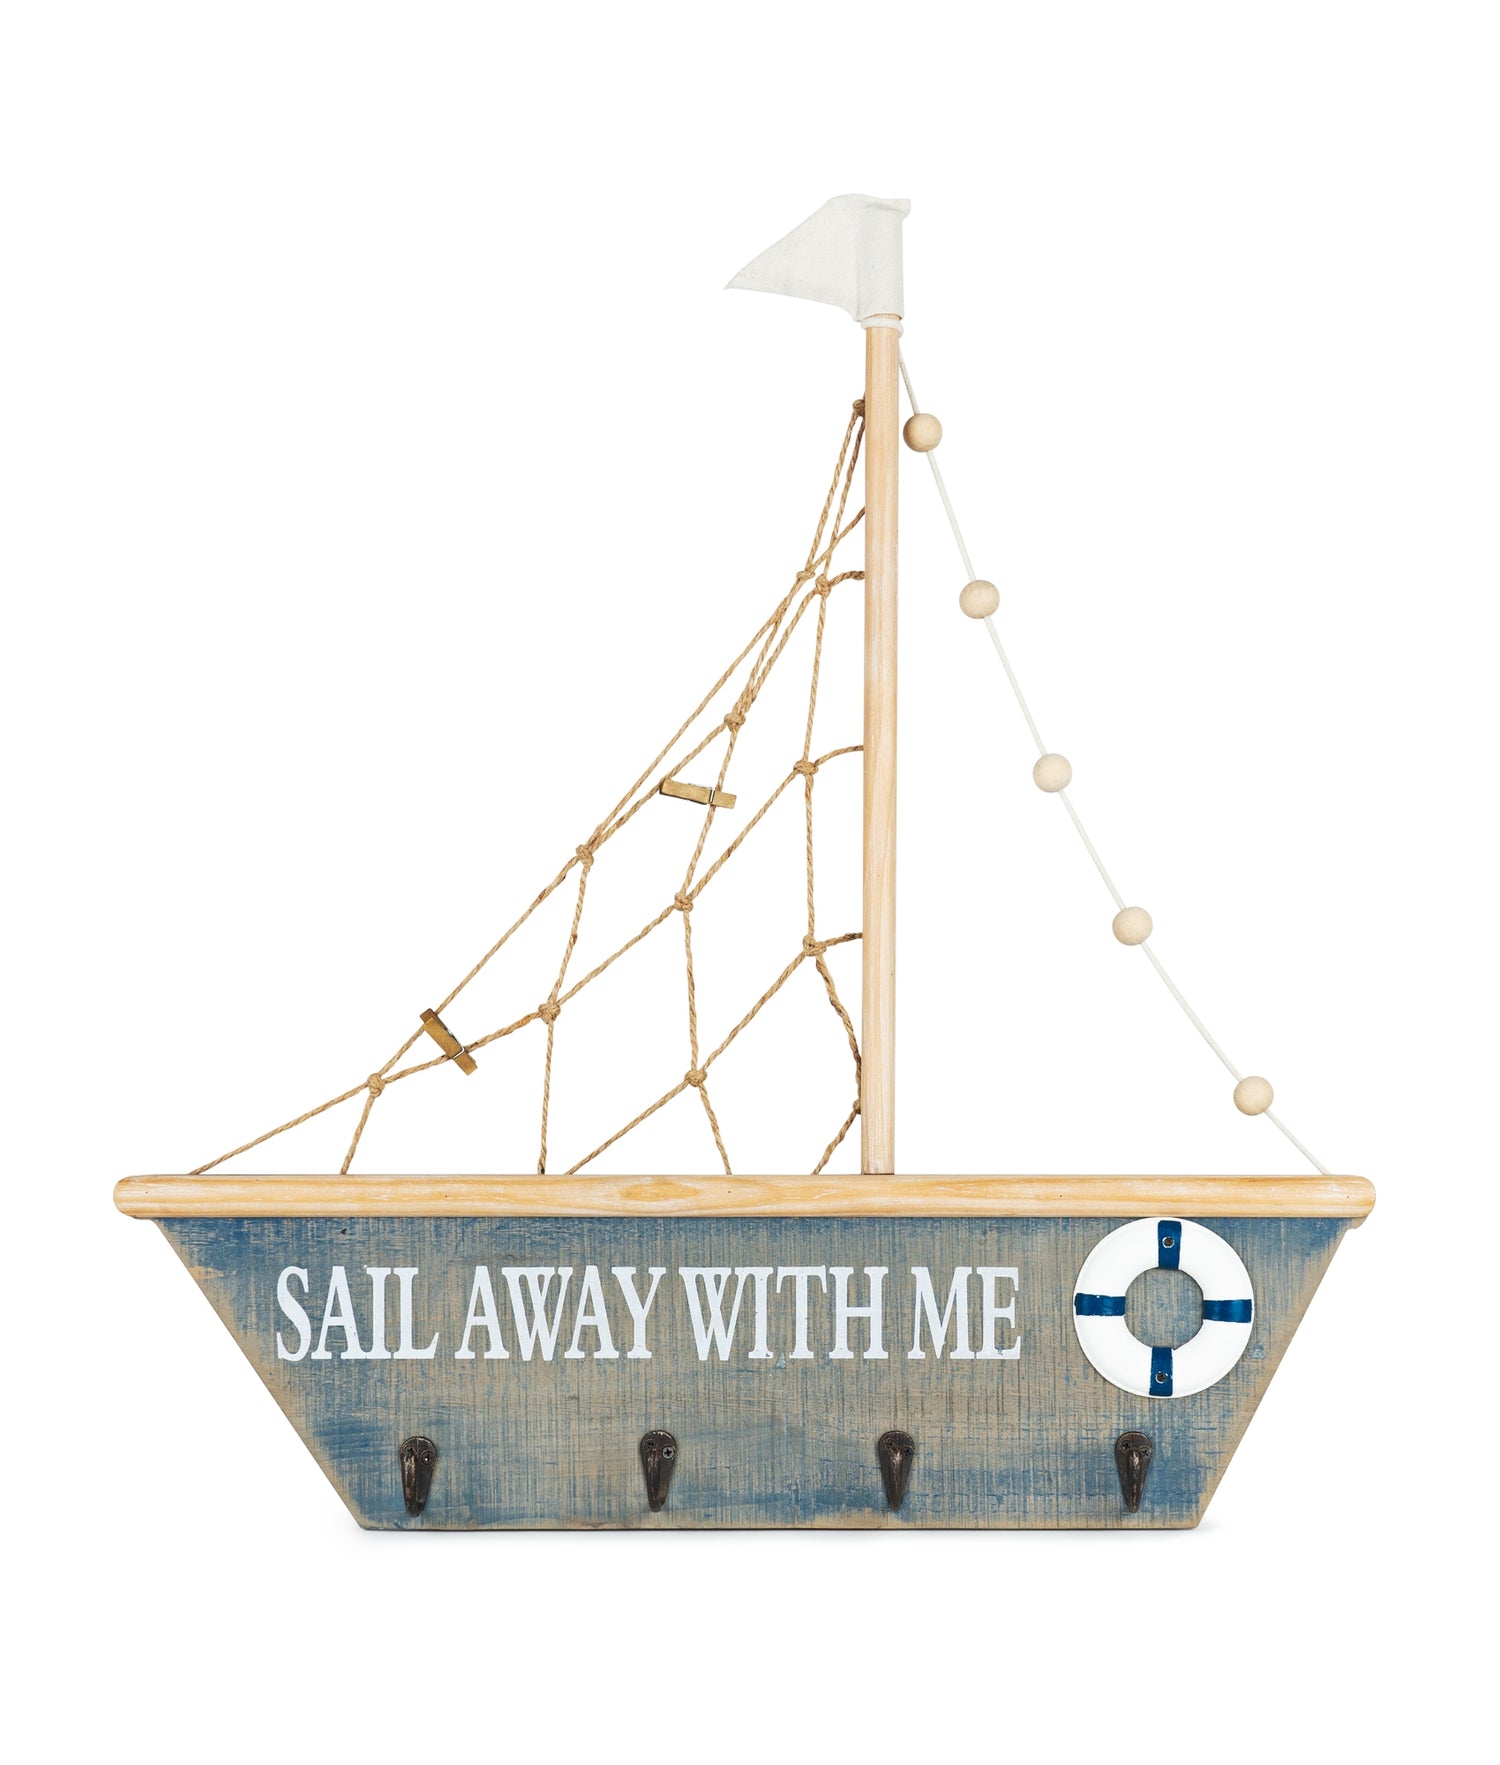 Sail Boat with Hooks 23"L x 24.5"H Wood